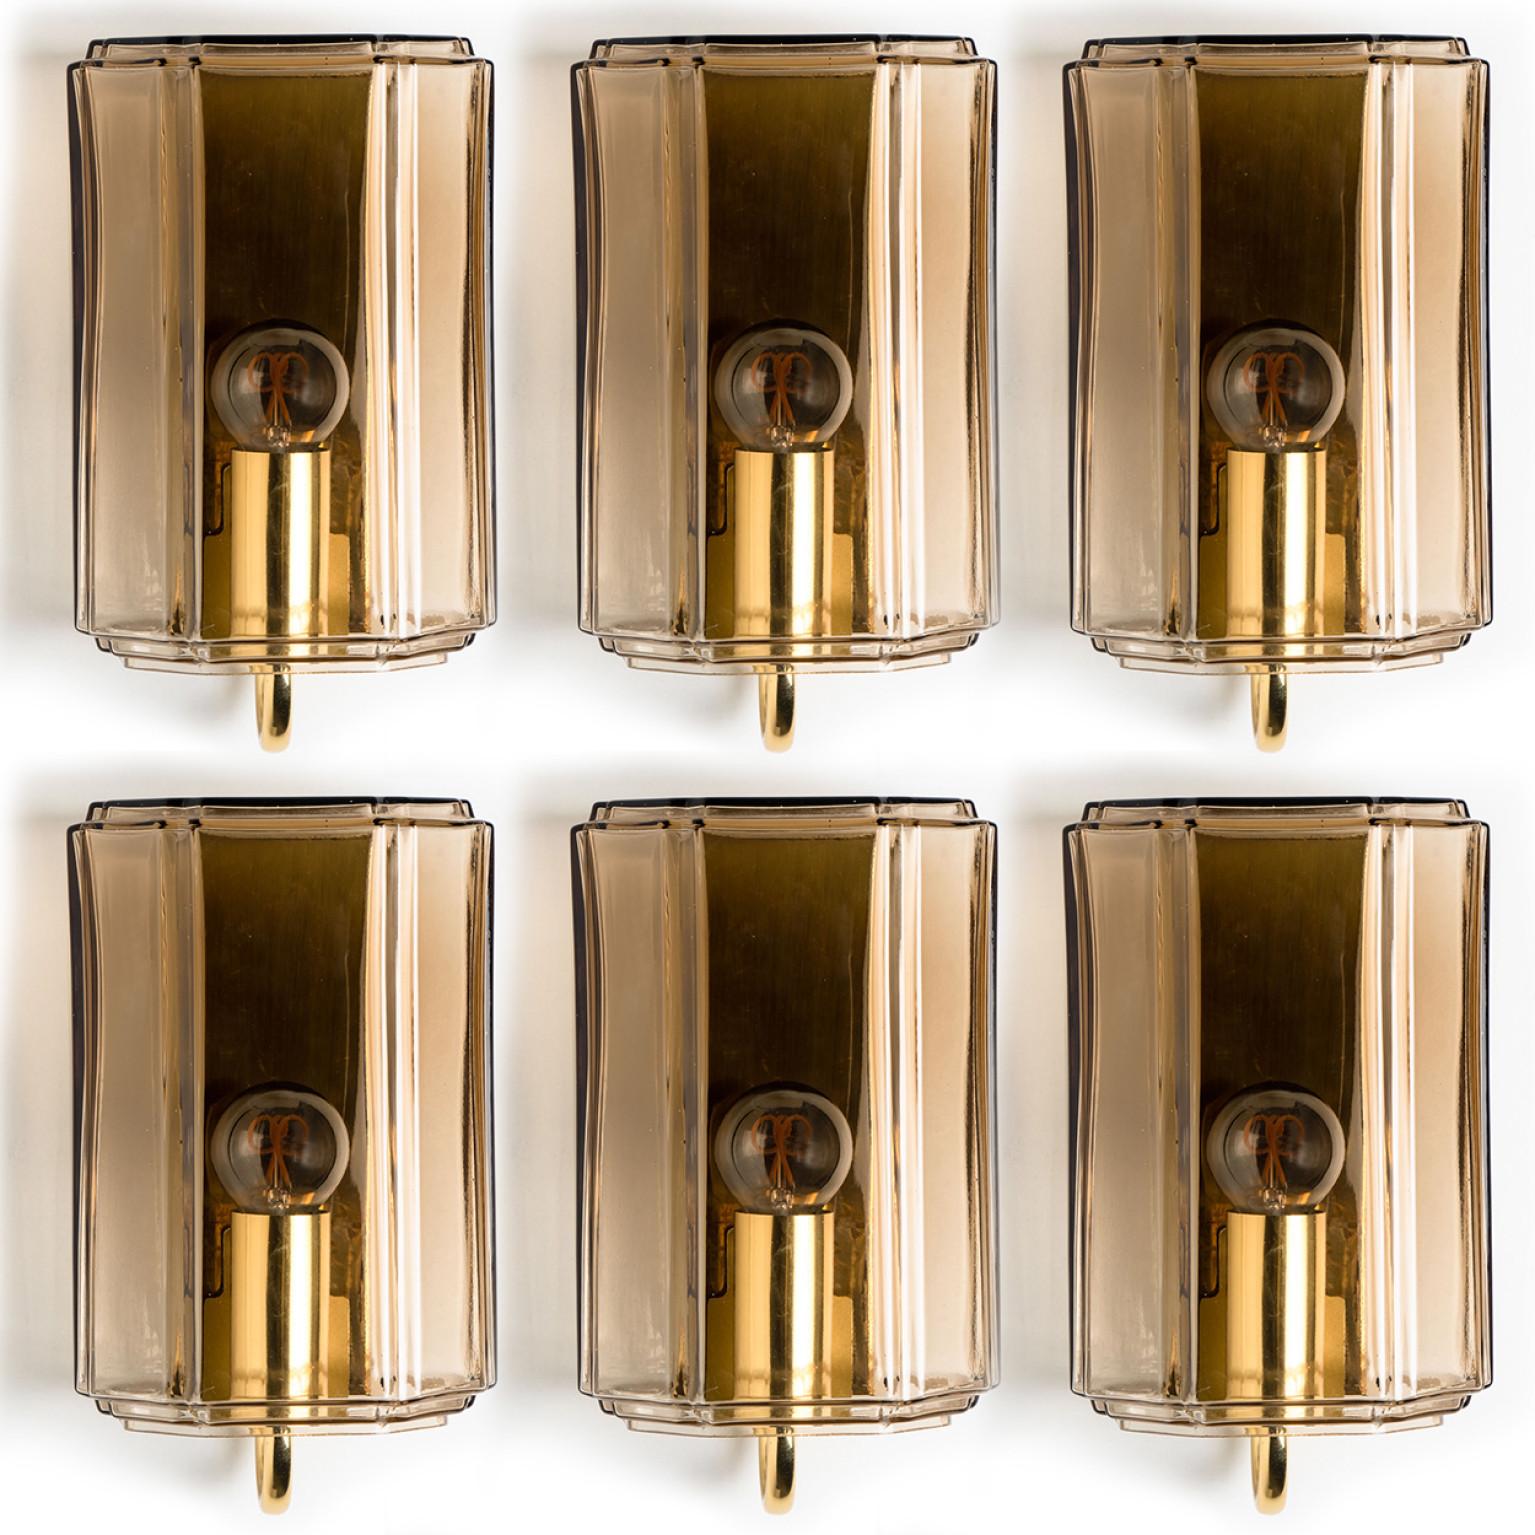 Mid-Century Modern Several Smoked Glass Wall Lights Sconces by Glashütte Limburg, Germany, 1960 For Sale